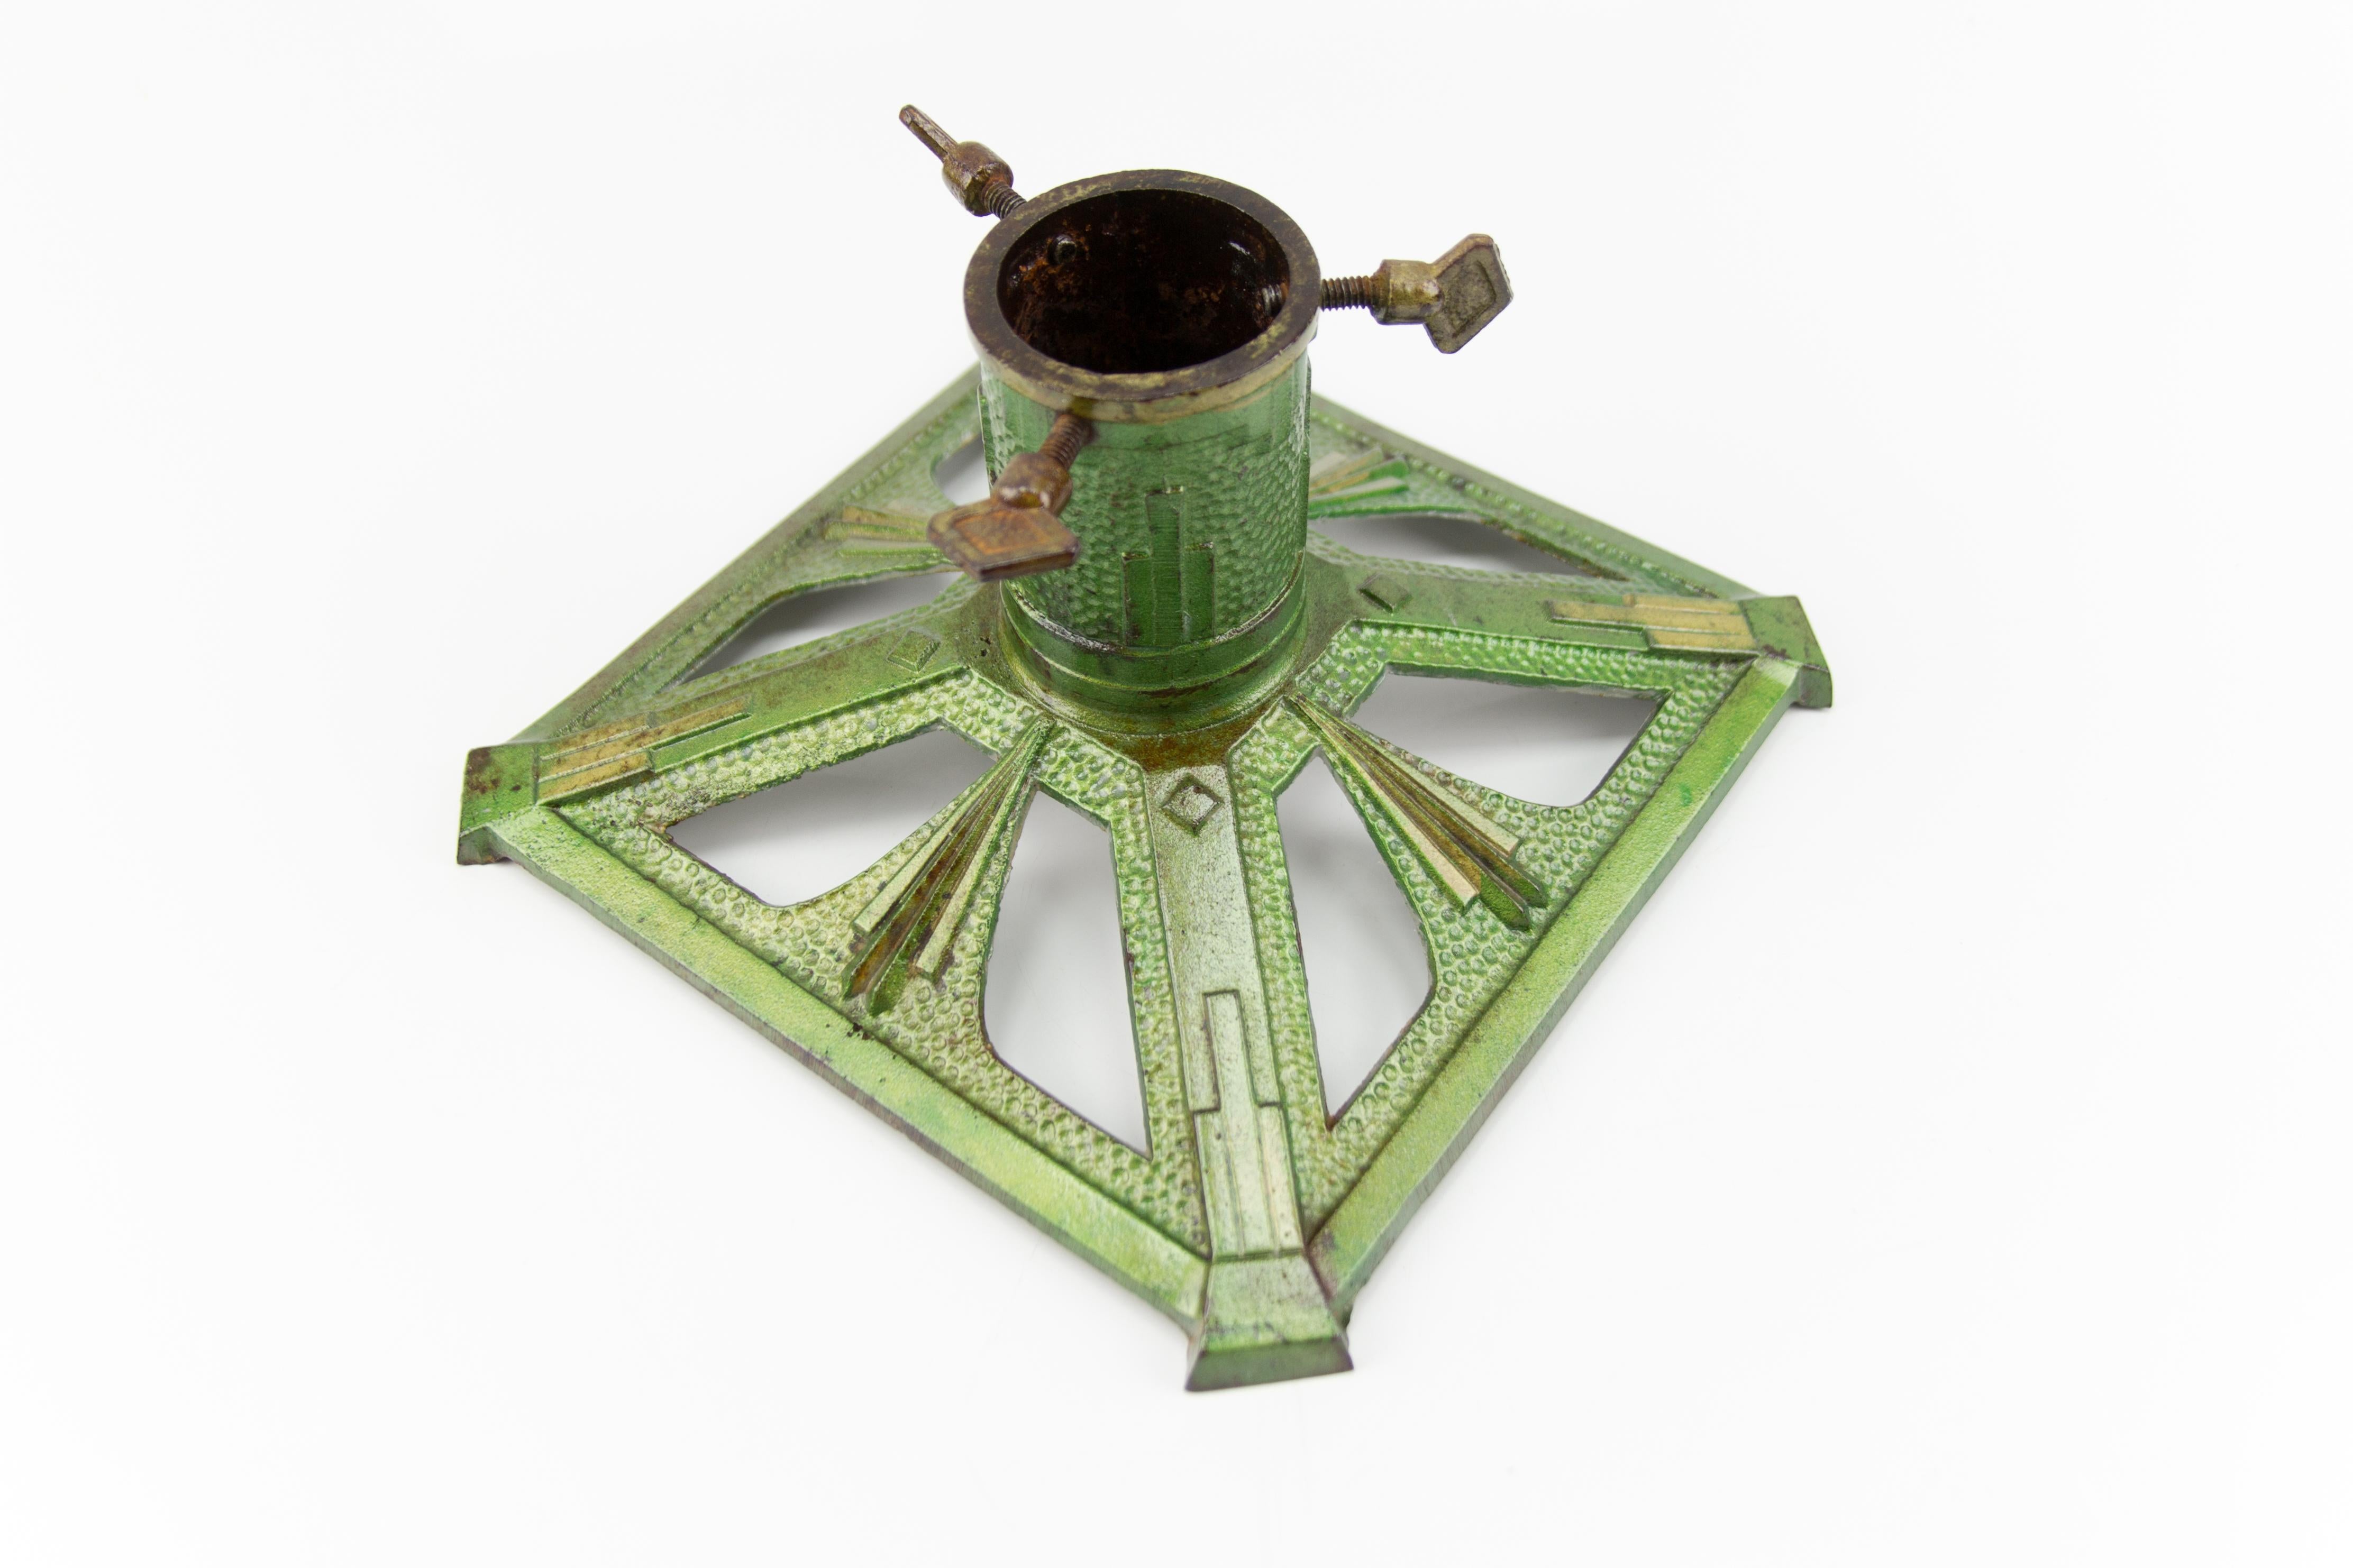 Art Deco style green and golden color cast iron Christmas tree stand, Germany, 1950s.
Dimensions:
Height 13 cm / 5.11 in, width 23 cm / 9.05 in, length 23 cm / 9.05 in, depth 8 cm / 3.14 in.